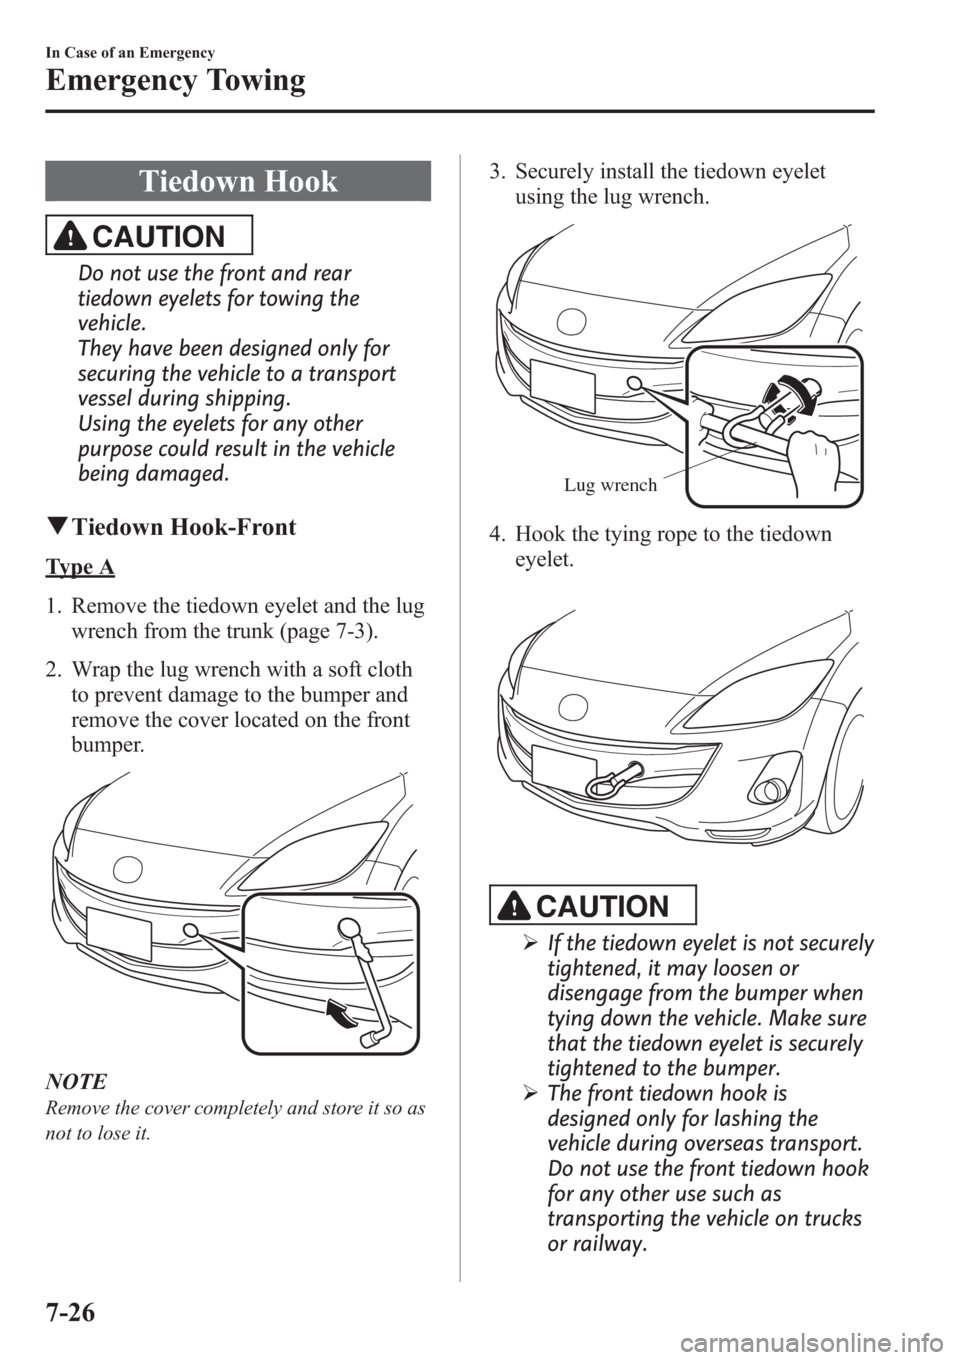 MAZDA MODEL 3 HATCHBACK 2013  Owners Manual (in English) Tiedown Hook
CAUTION
Do not use the front and rear
tiedown eyelets for towing the
vehicle.
They have been designed only for
securing the vehicle to a transport
vessel during shipping.
Using the eyelet